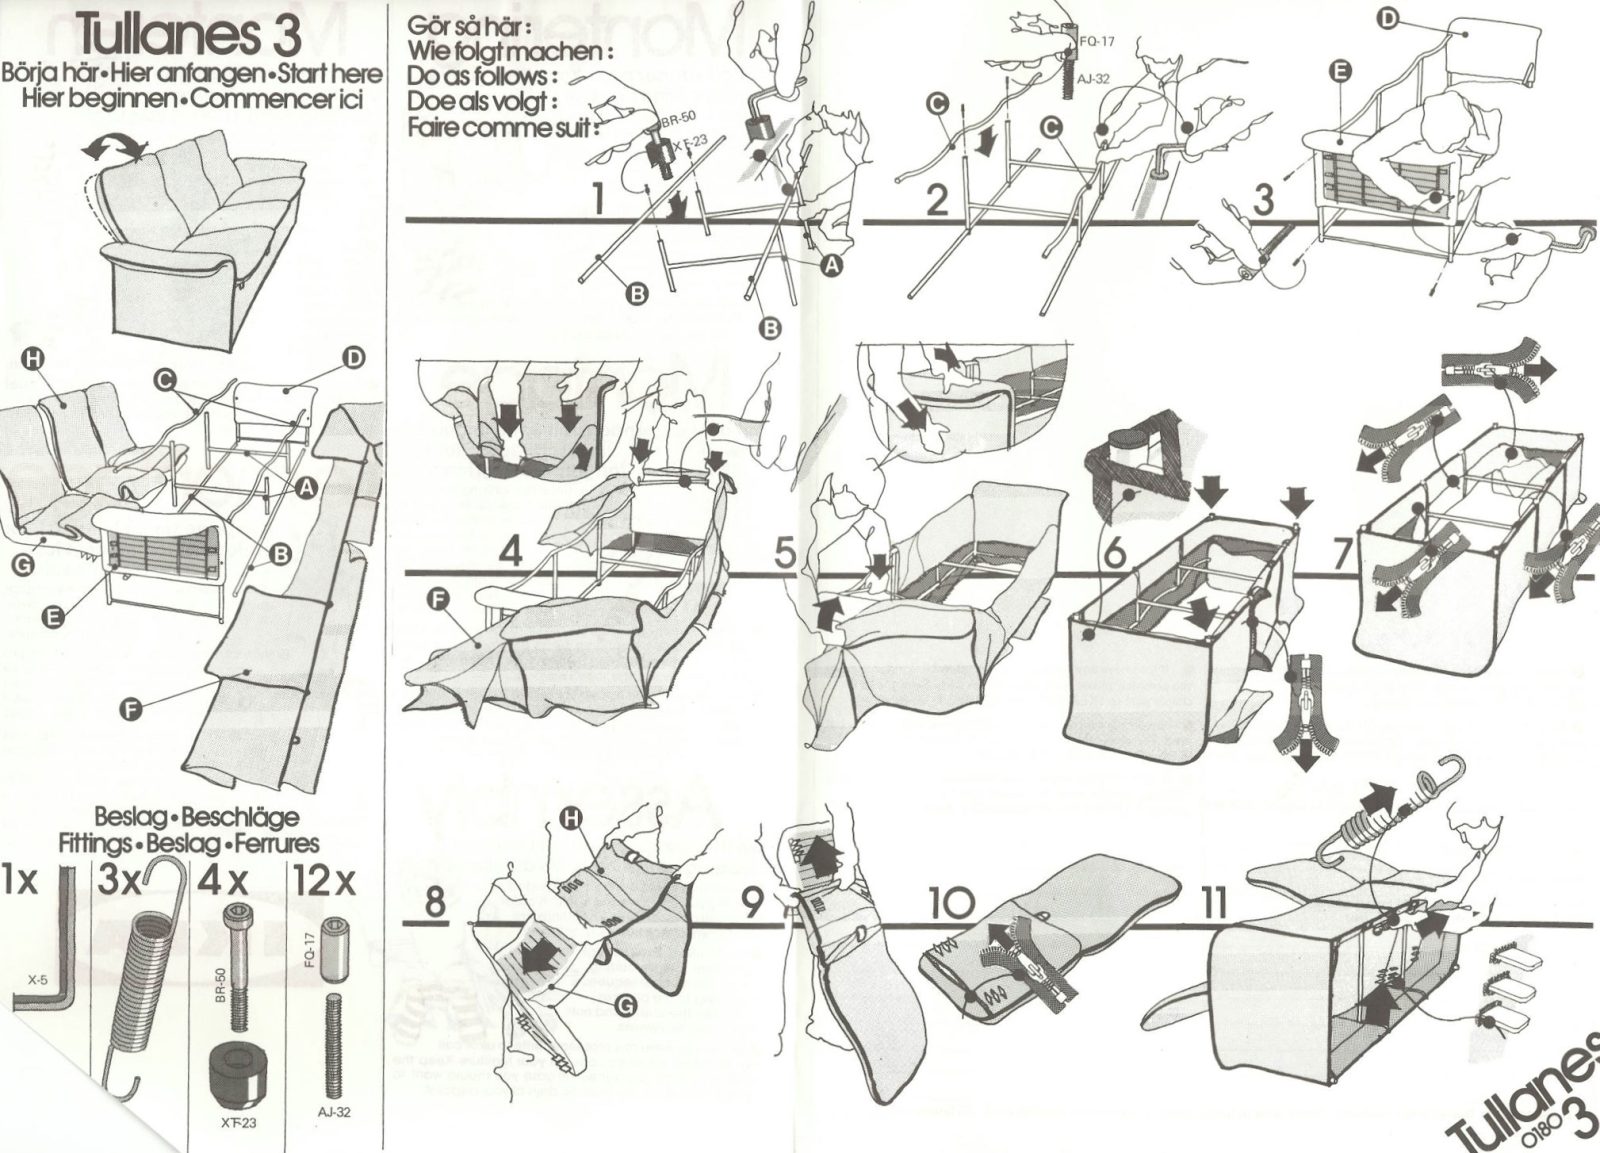 Complicated and hard-to-understand assembly instructions from IKEA for the TULLANÄS armchair.